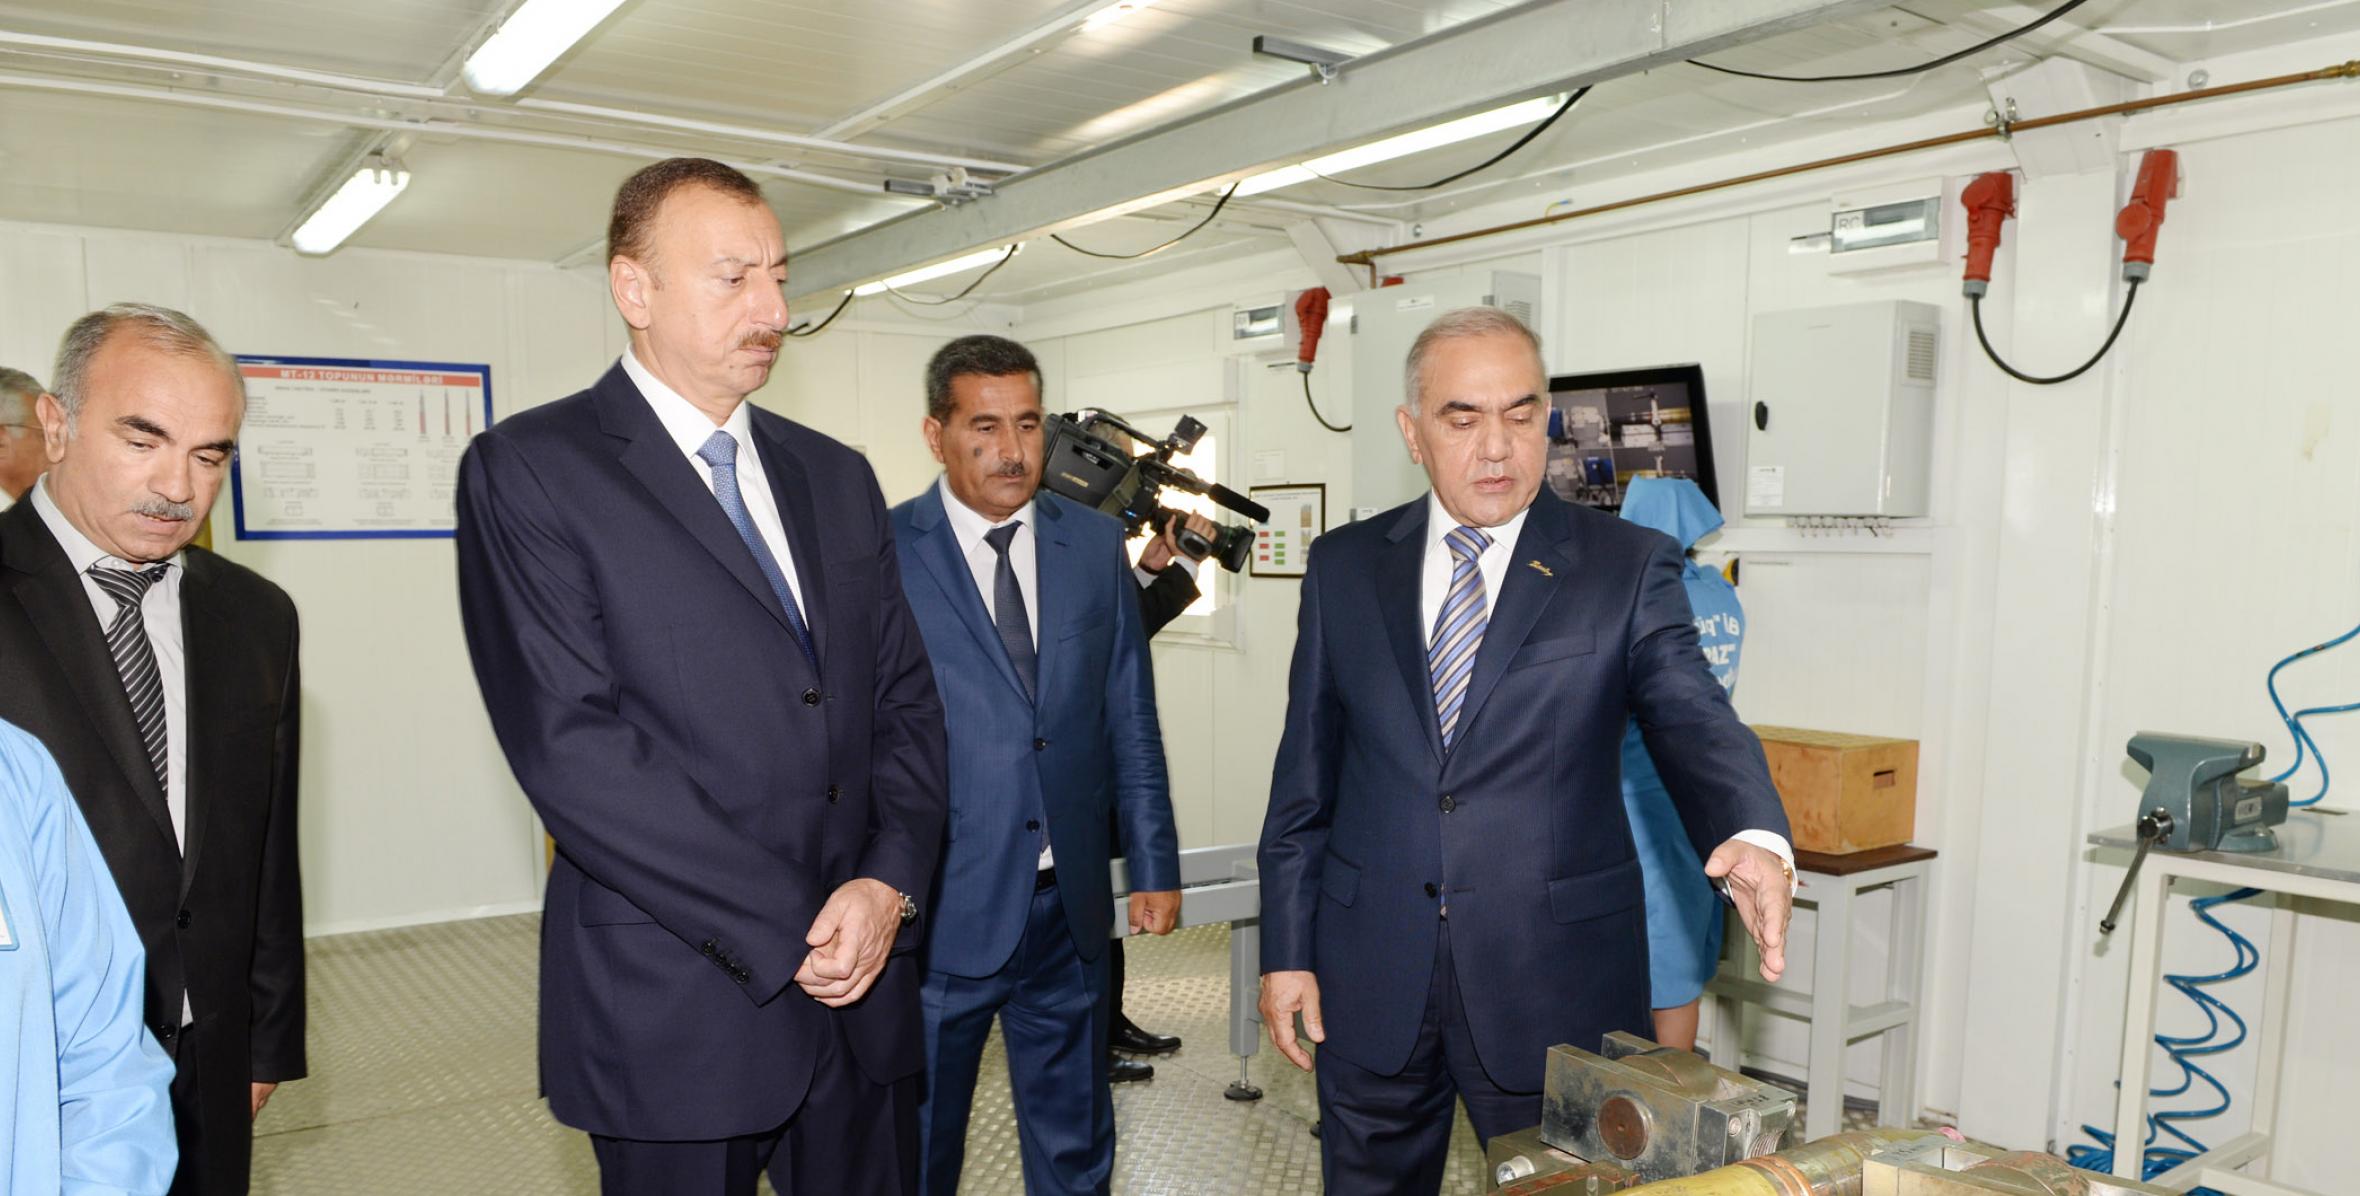 Ilham Aliyev attended the opening of a center for the disposal of ammunition of the “Araz” plant under the “Ufug” Production Association of the Ministry of Defense Industry